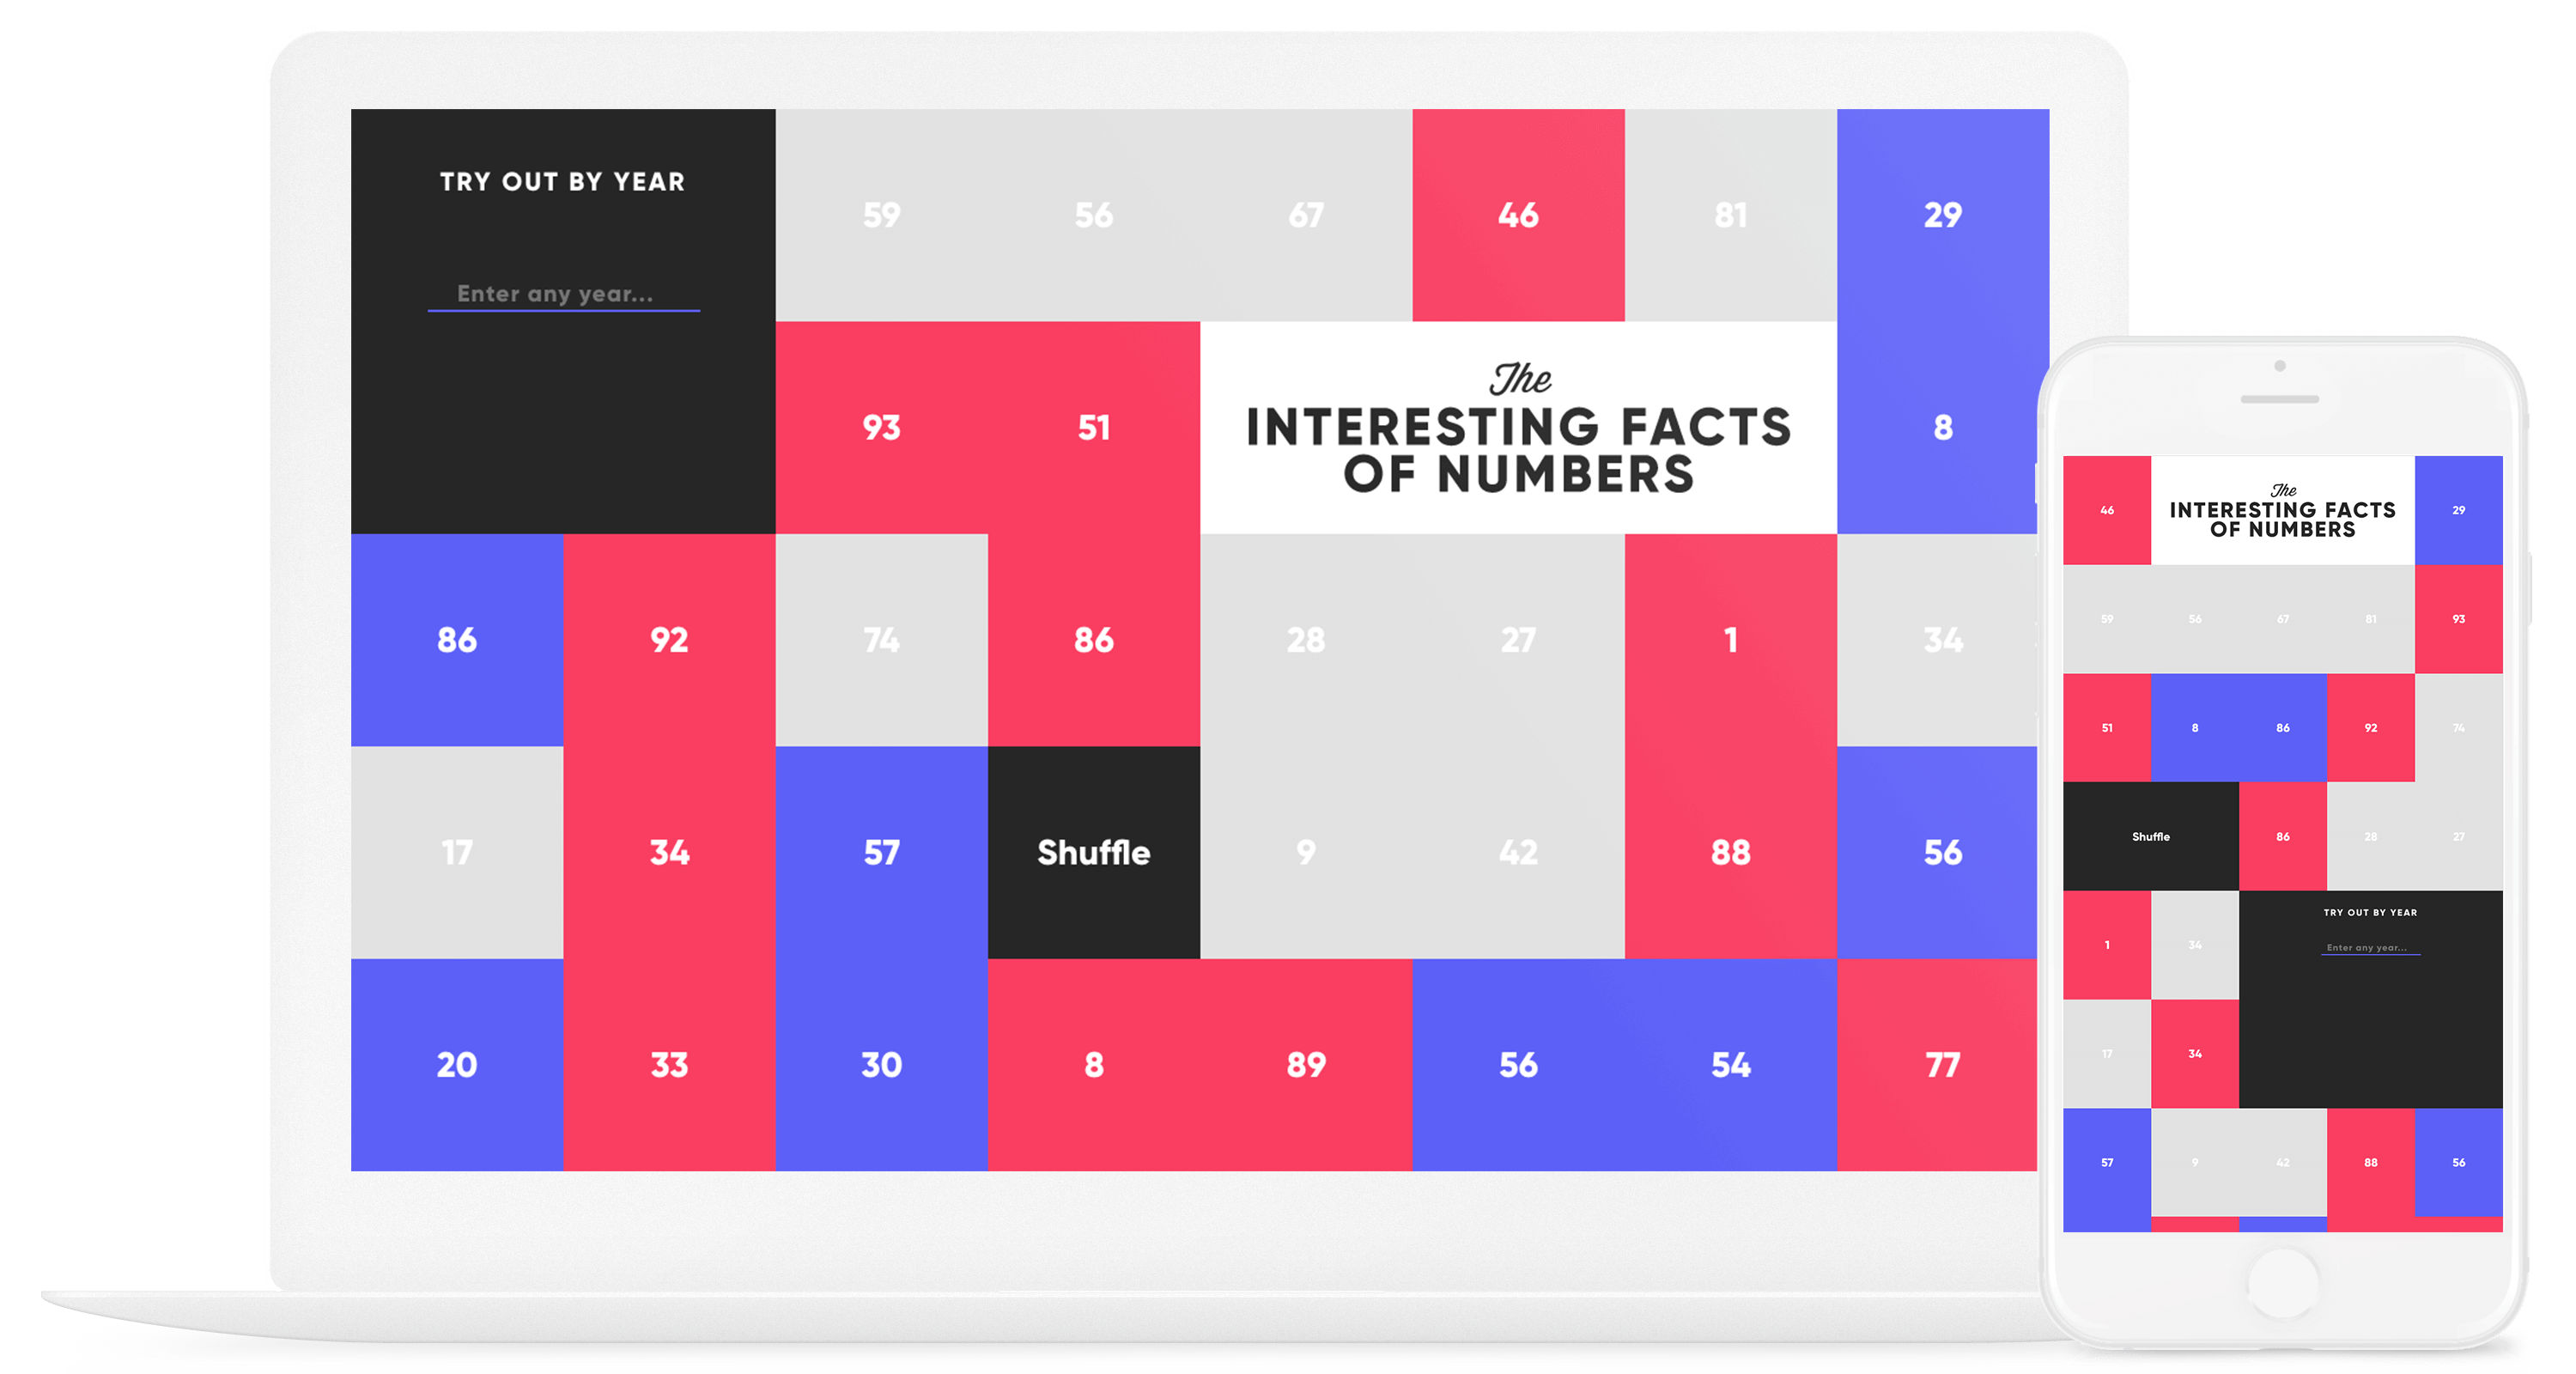 The Interesting Facts of Numbers website